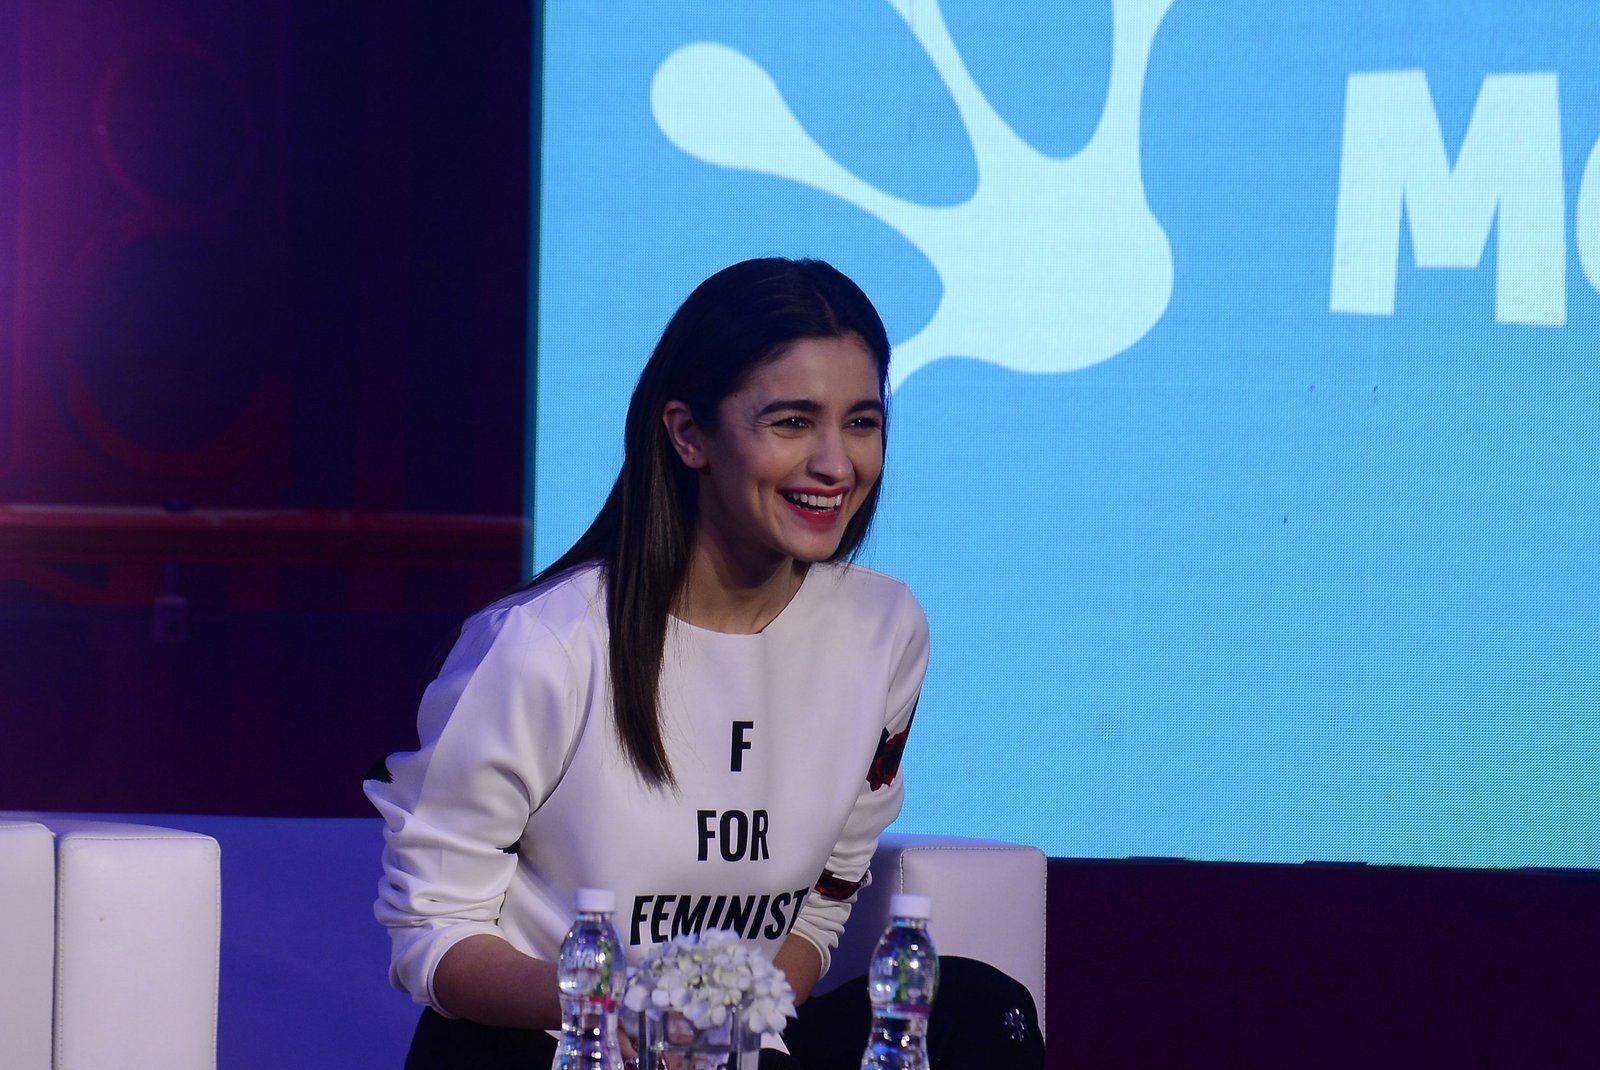 Alia Bhatt during the launch of Life Sim Experiential Game Photos | Picture 1485223